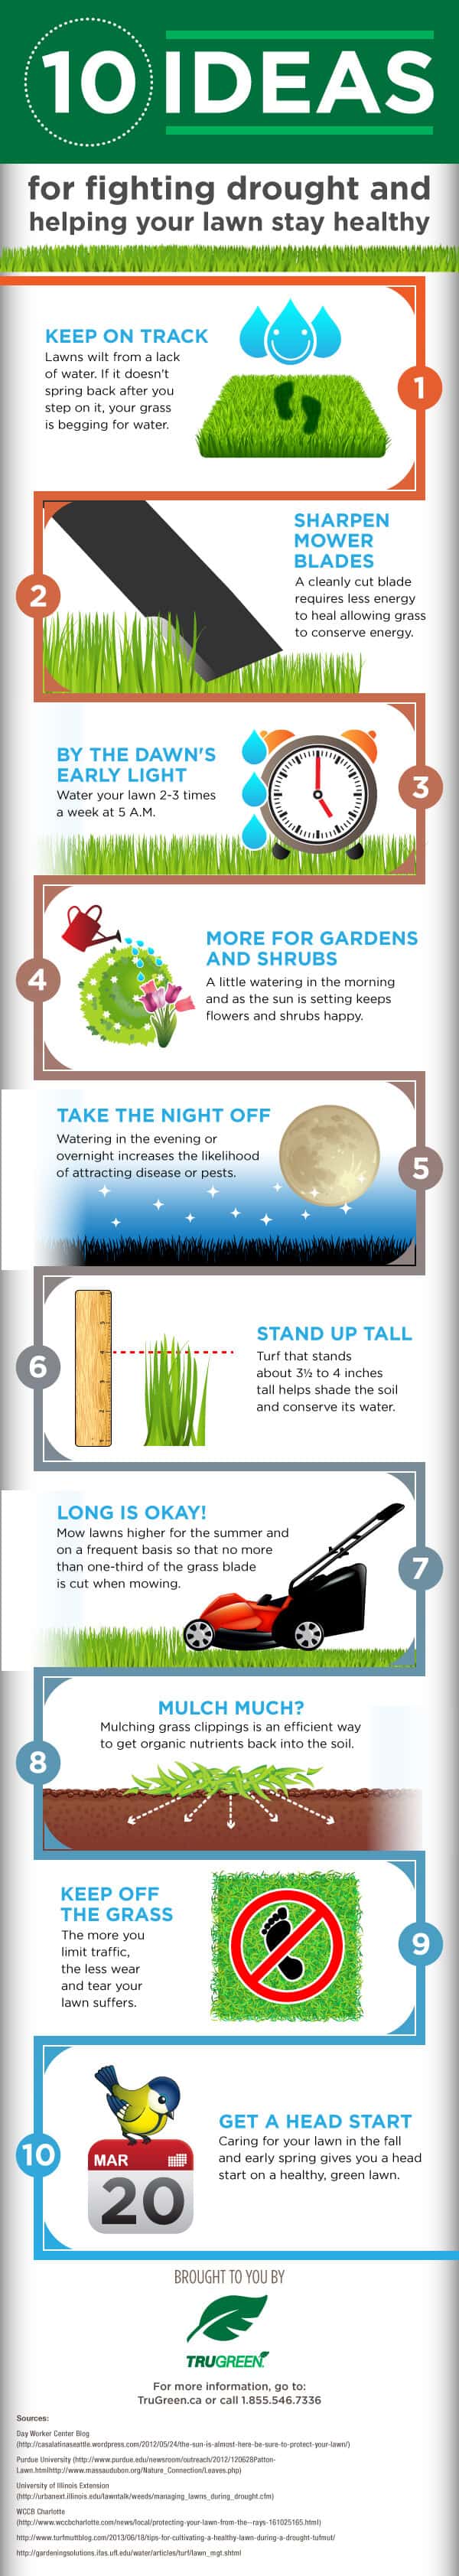 TRUGreen Infographic Watering Your Lawn